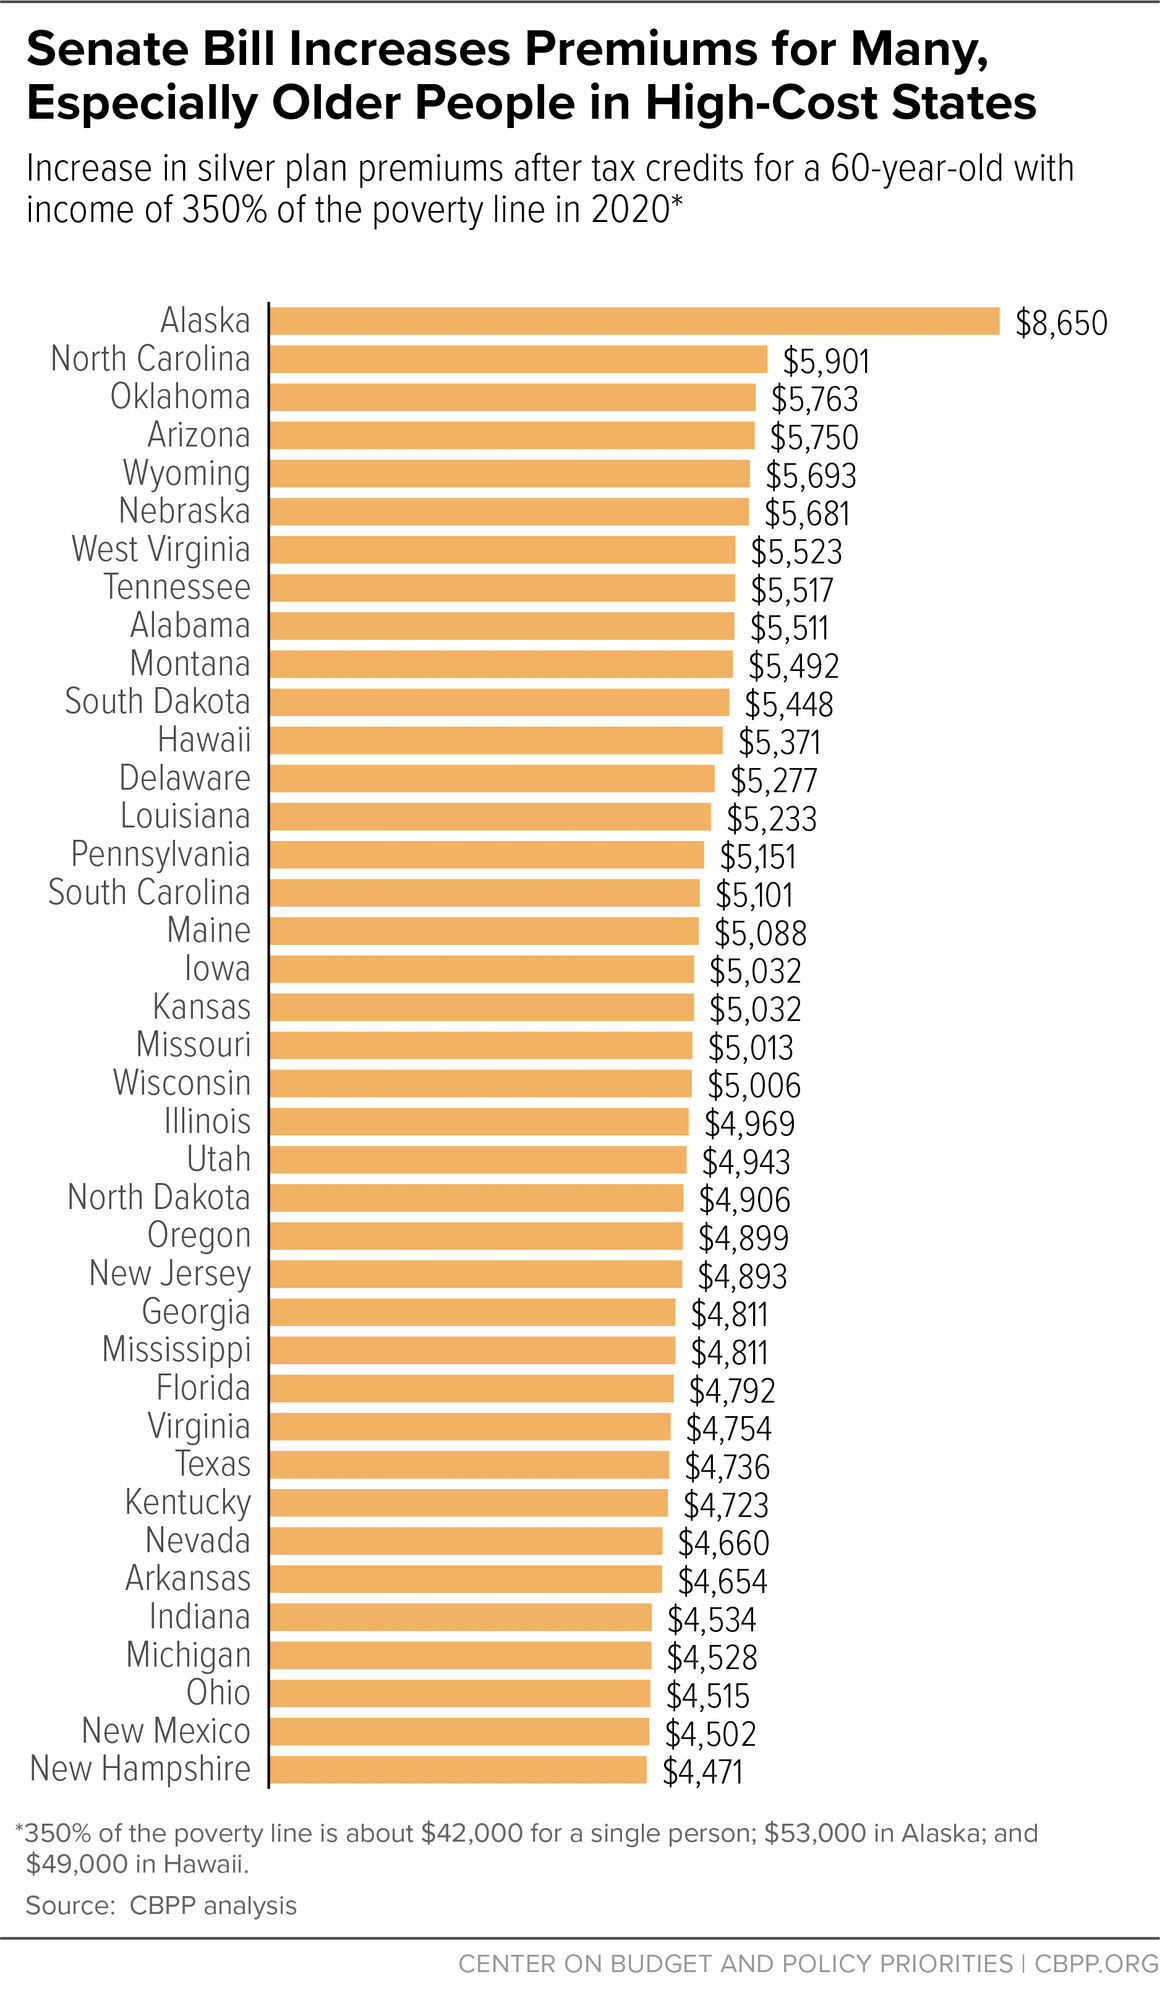 Senate Bill Increases Premiums for Many, Especially Older People in High-Cost States